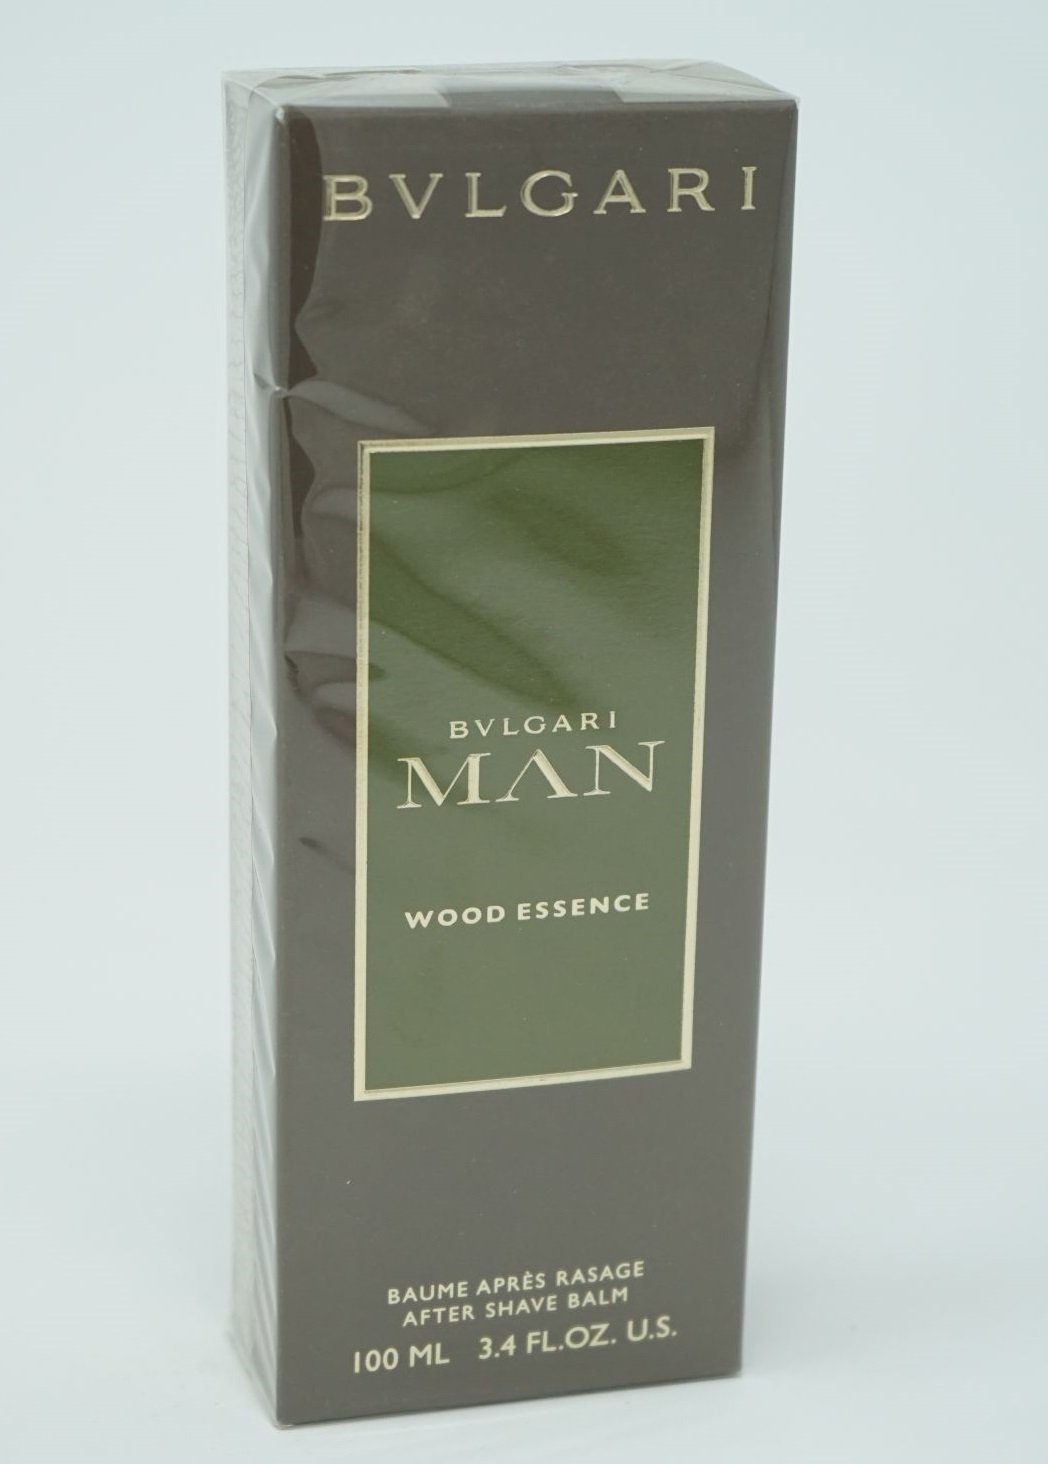 BVLGARI After-Shave Balsam Bvlgari Man Wood Essence After Shave Balm 100ml